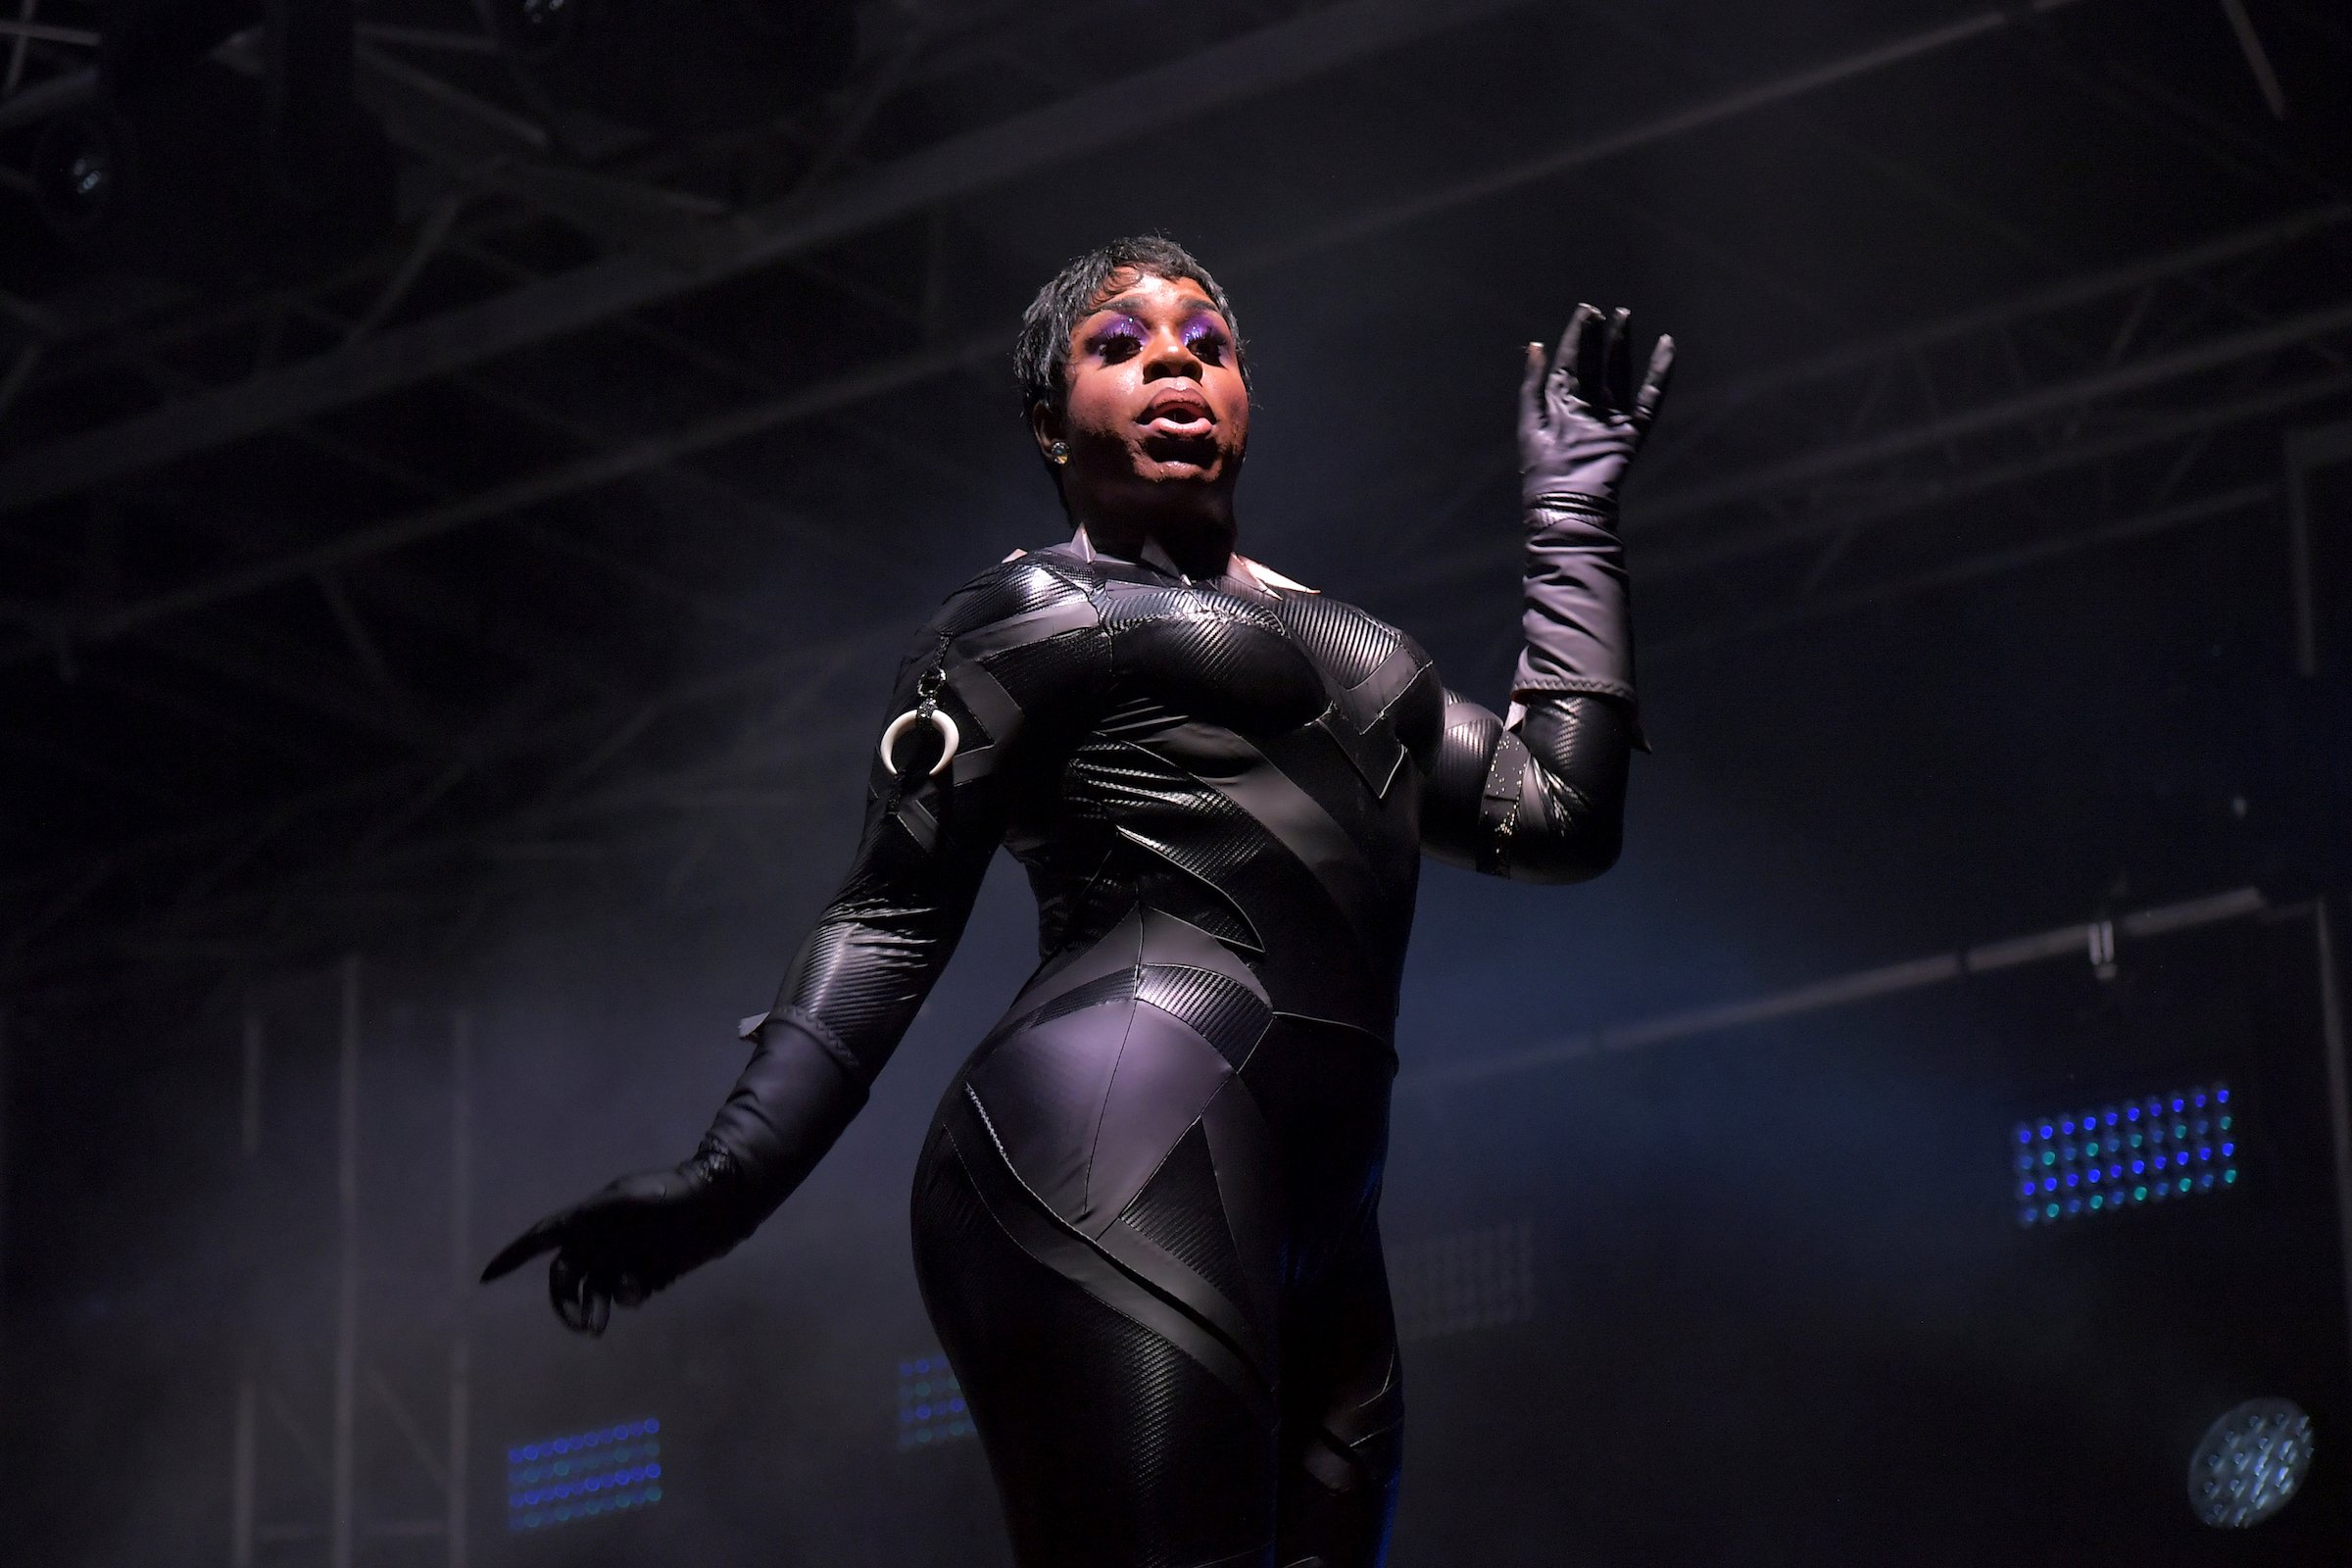 TV personality and Drag Queen Monét X Change performs during Drive'N Drag